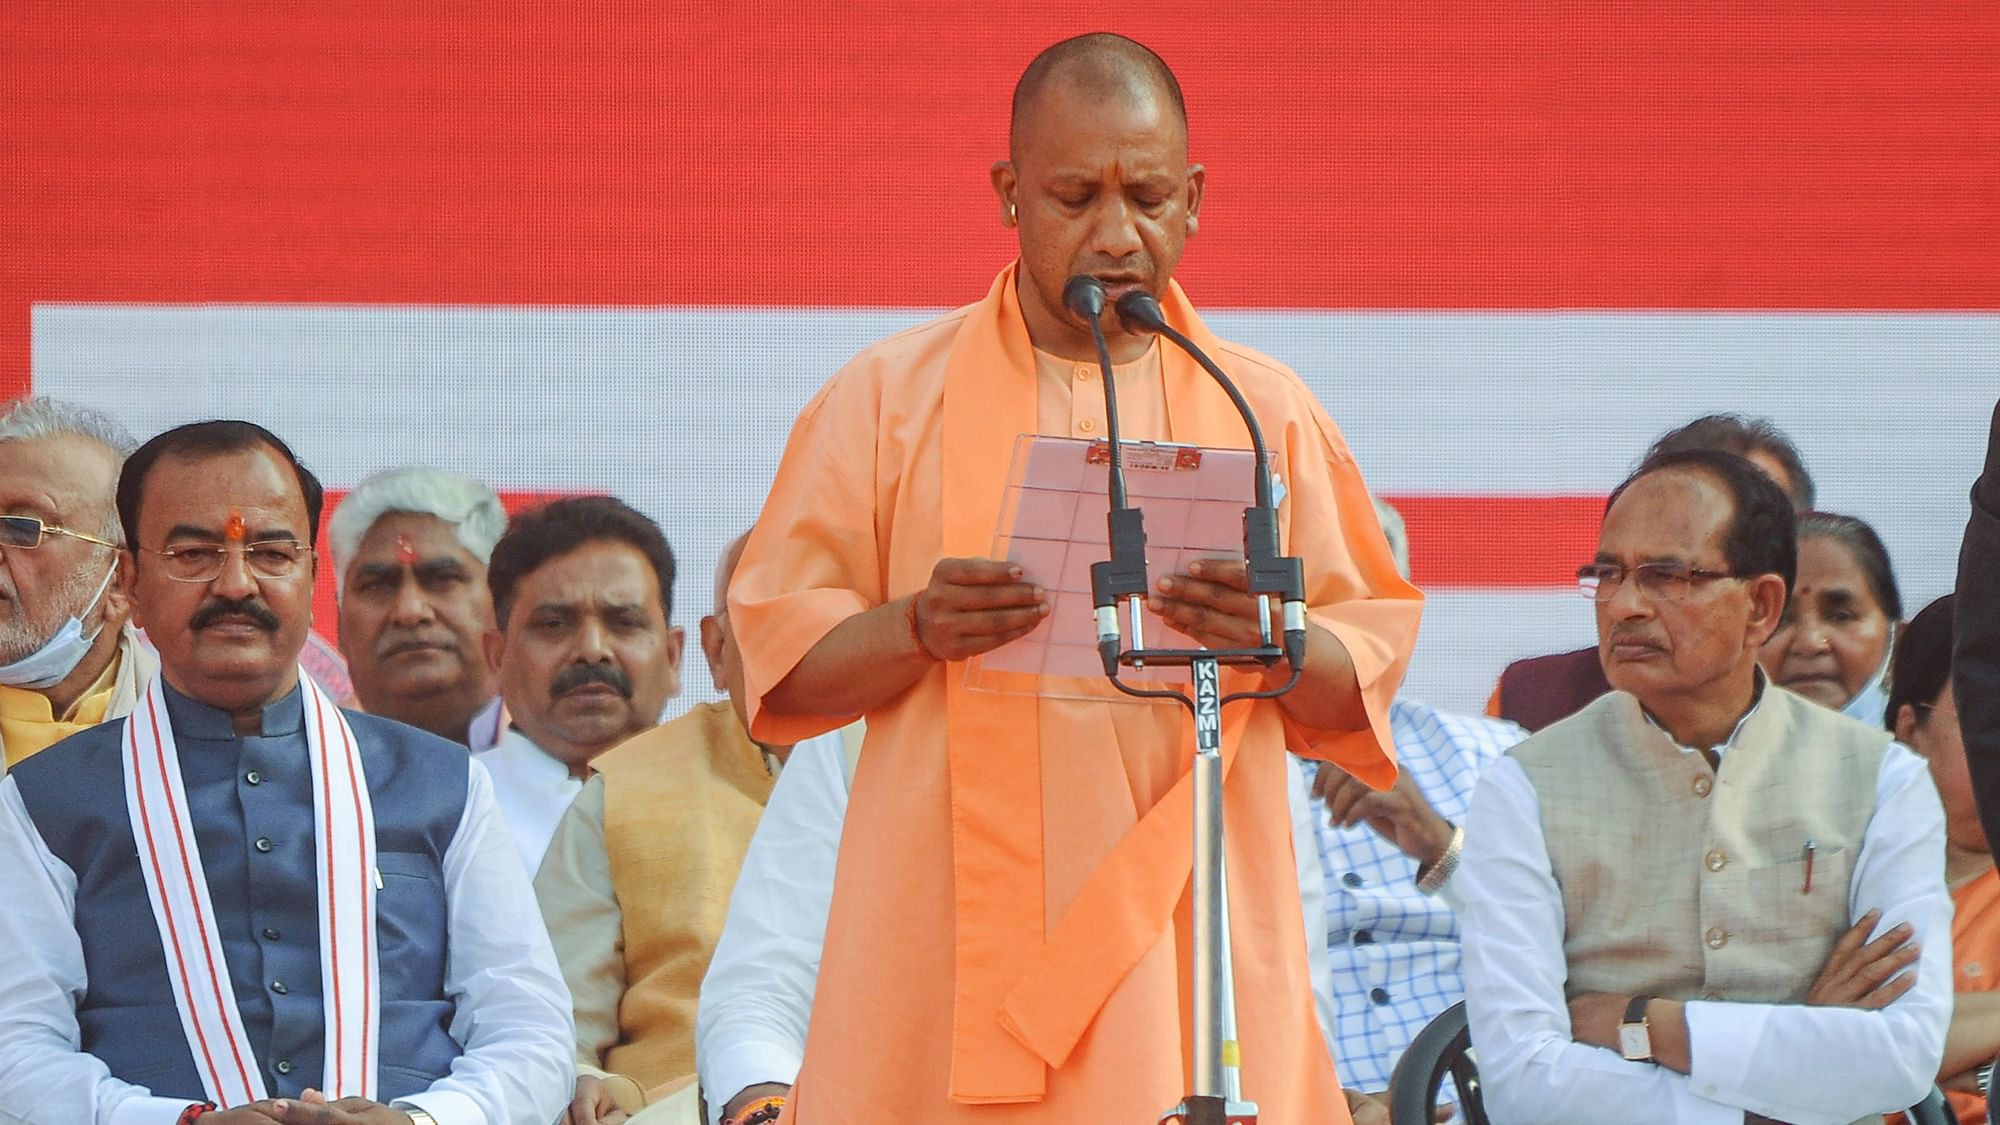 <div class="paragraphs"><p>Yogi Adityanath took the oath as the chief minister of Uttar Pradesh for a second consecutive term at the Ekana cricket stadium in Lucknow on Friday, 25 March.</p></div>